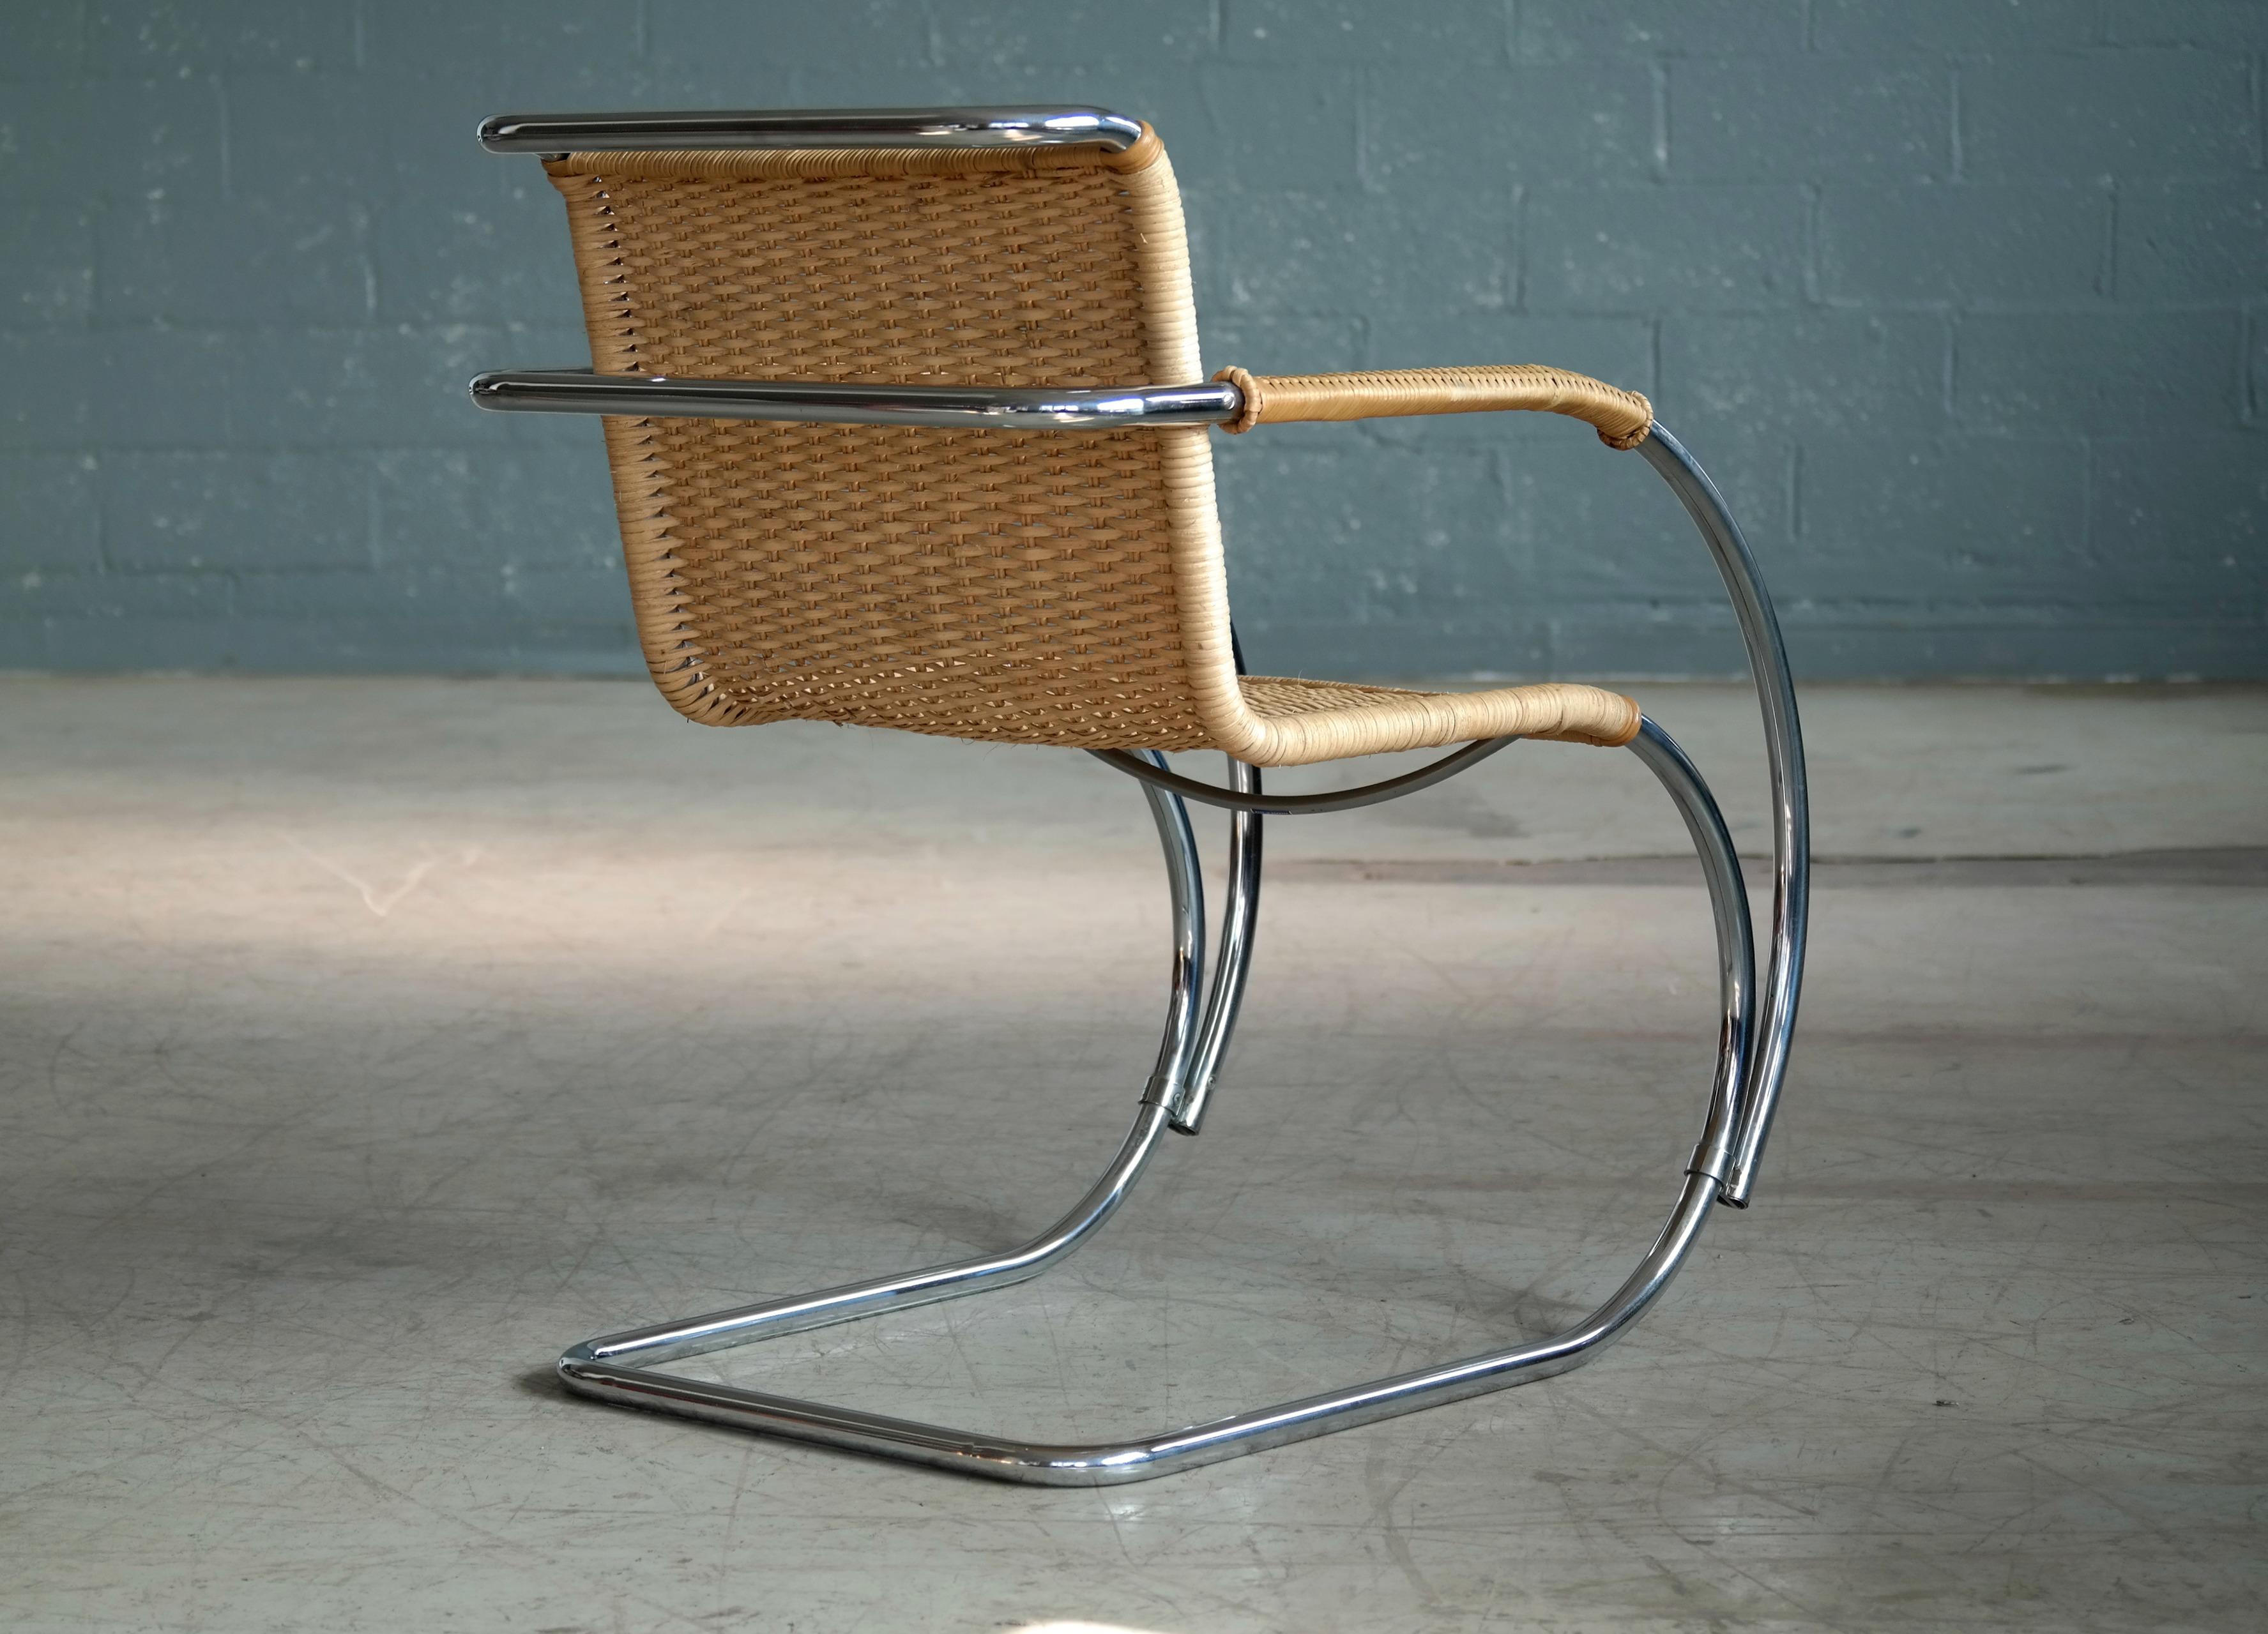 Early 20th Century Mies van der Rohe MR20 Bauhaus Lounge Chair in Chromed Steel and Wicker